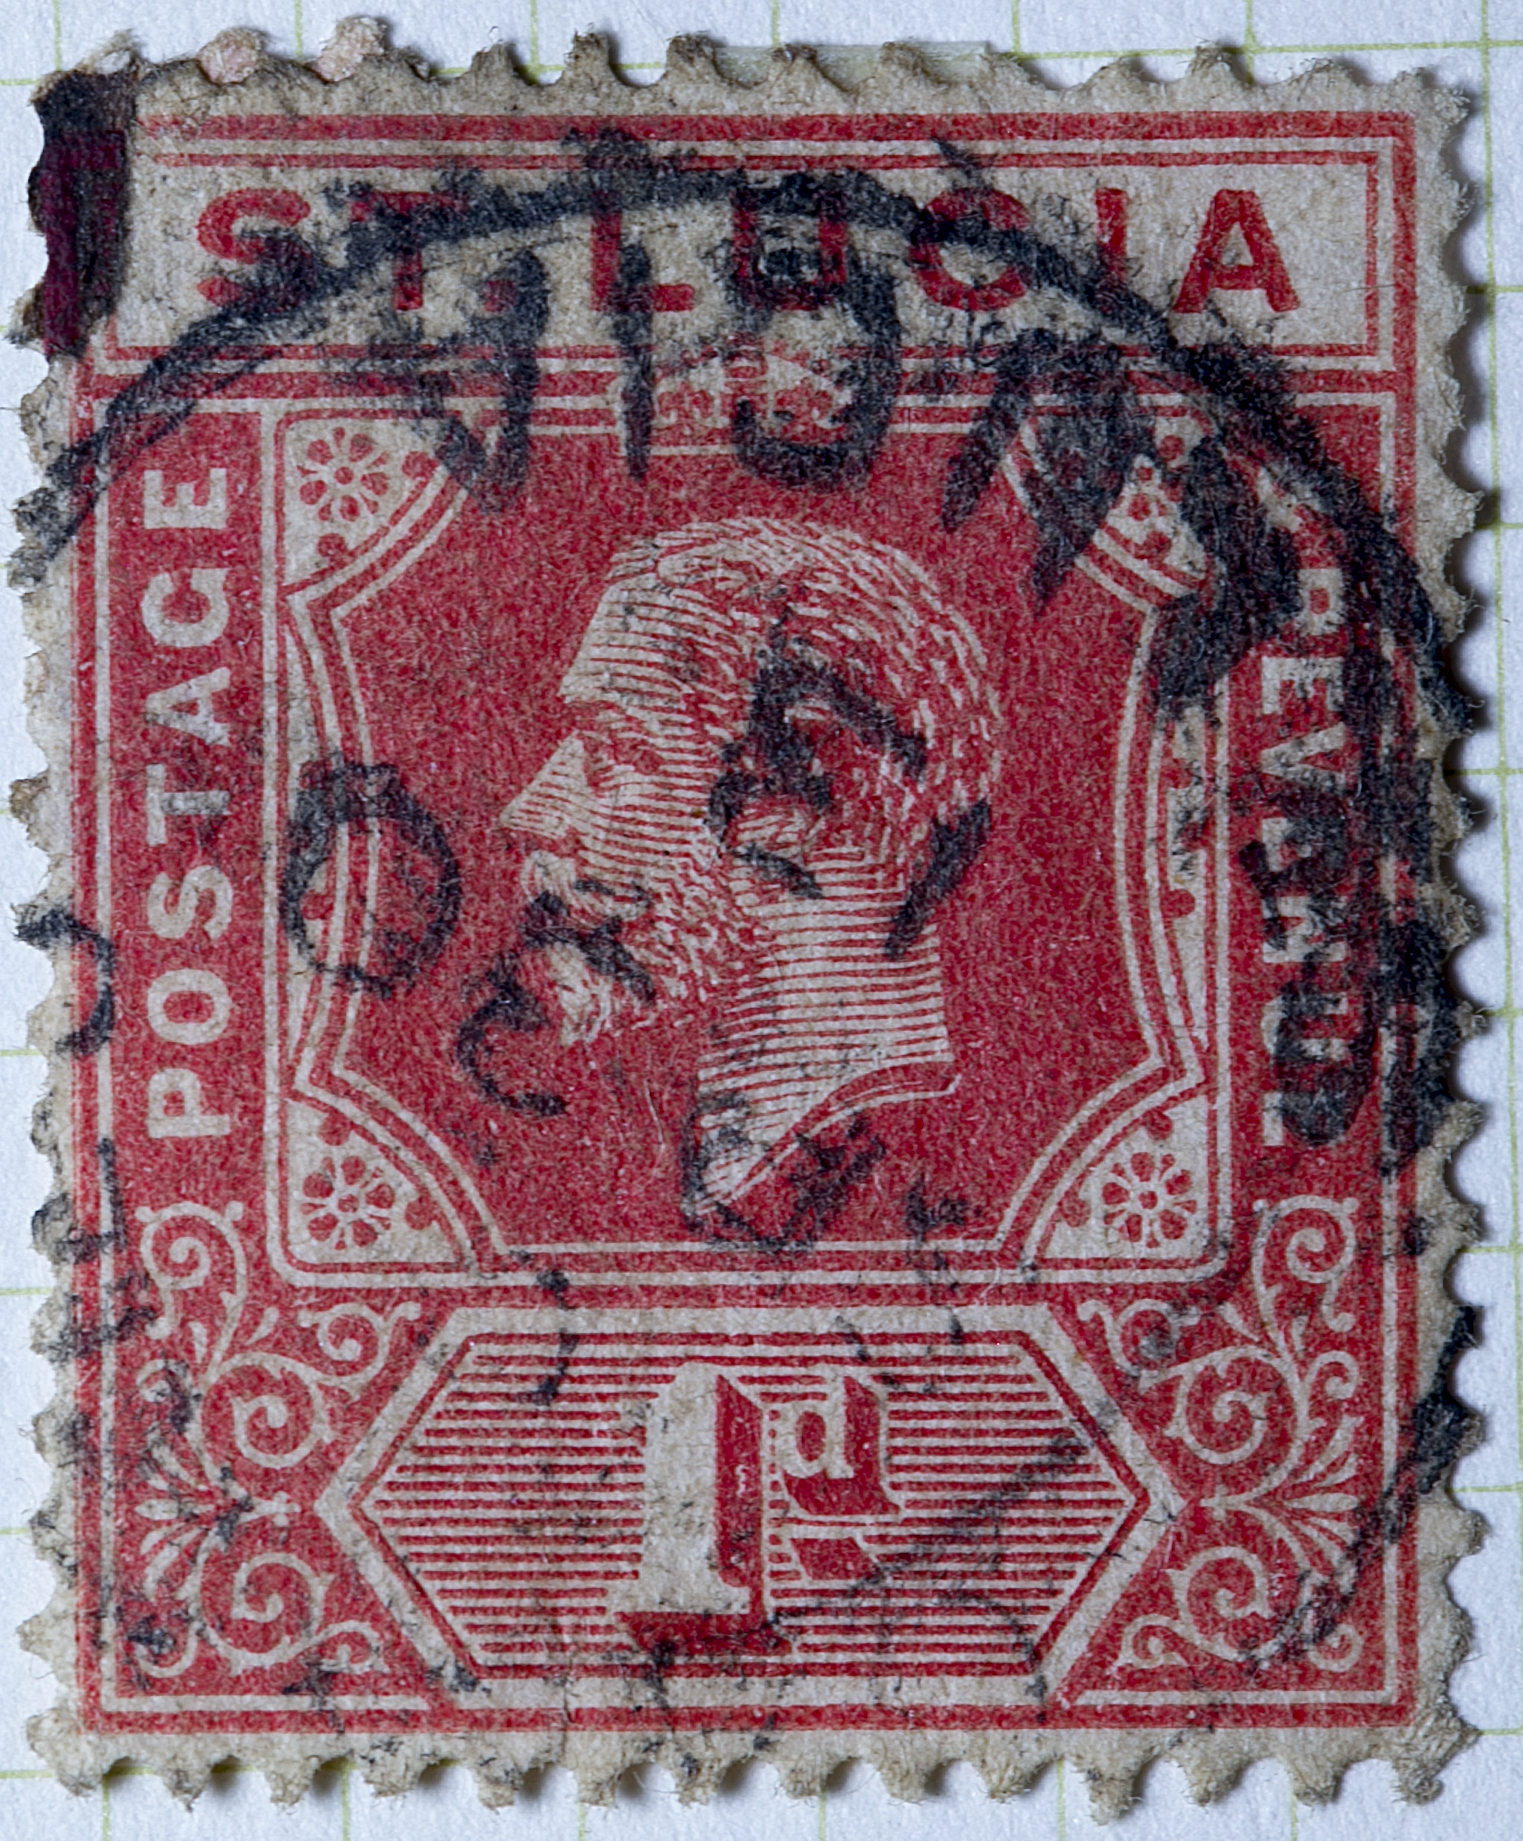 a stamp with the word a is engraved on it